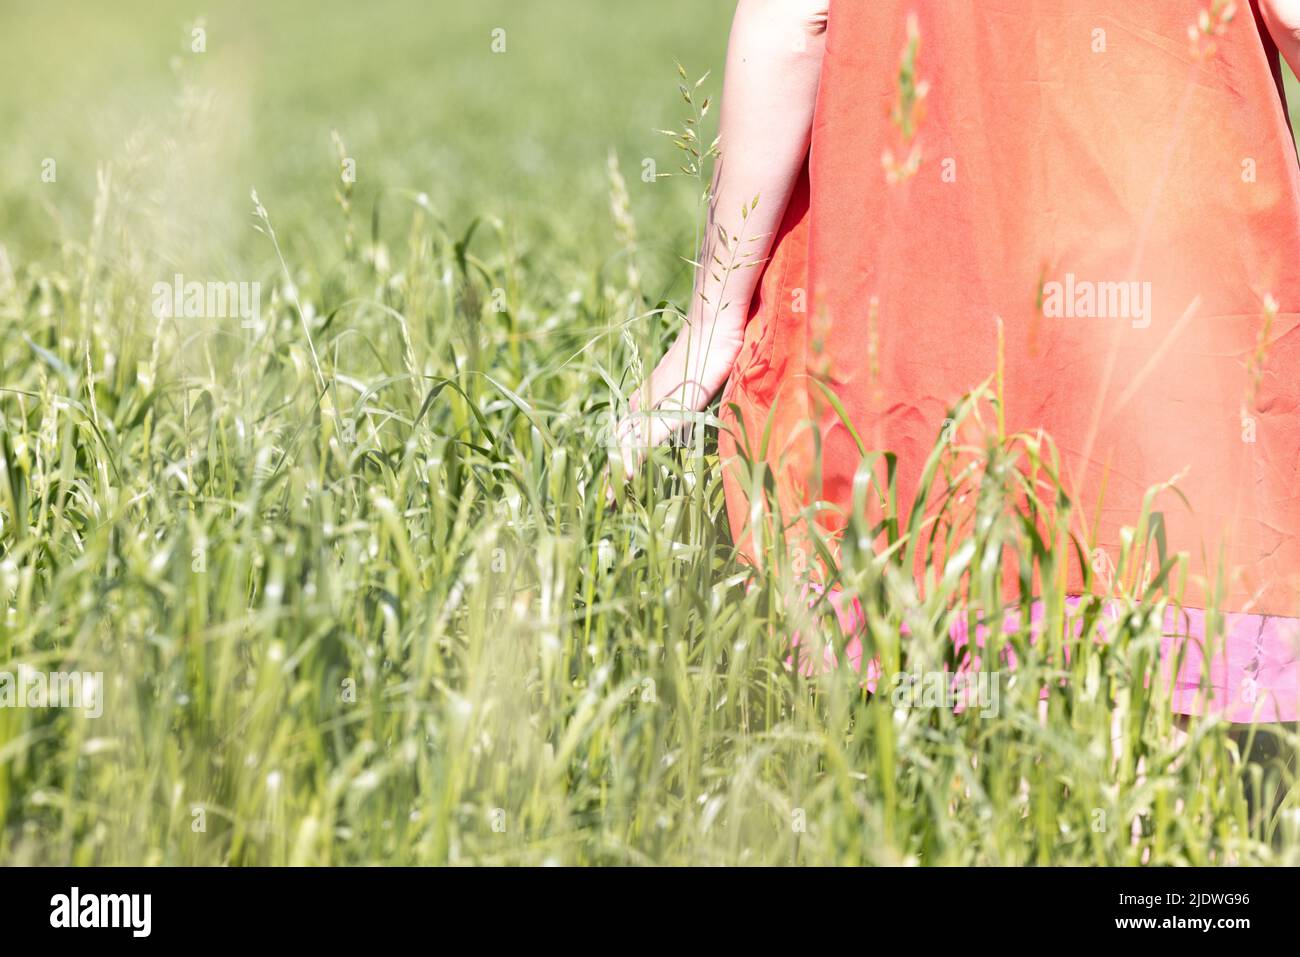 Hand Touching Grass At Summer Stock Photo, Picture and Royalty Free Image.  Image 82237401.